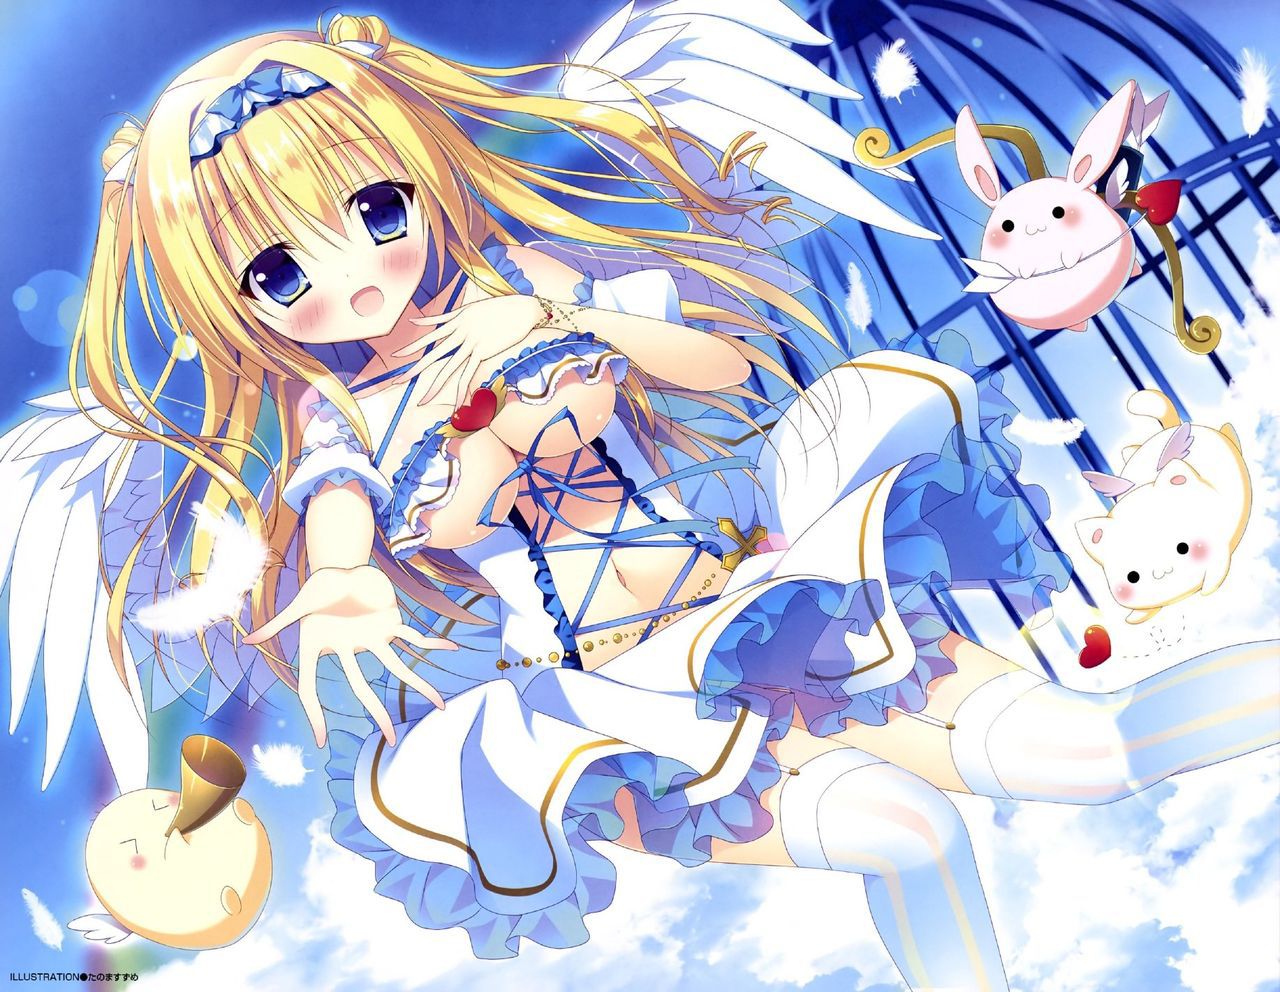 [2nd] Refreshing Blue sky is a beautiful secondary image 4 [non-erotic] 25